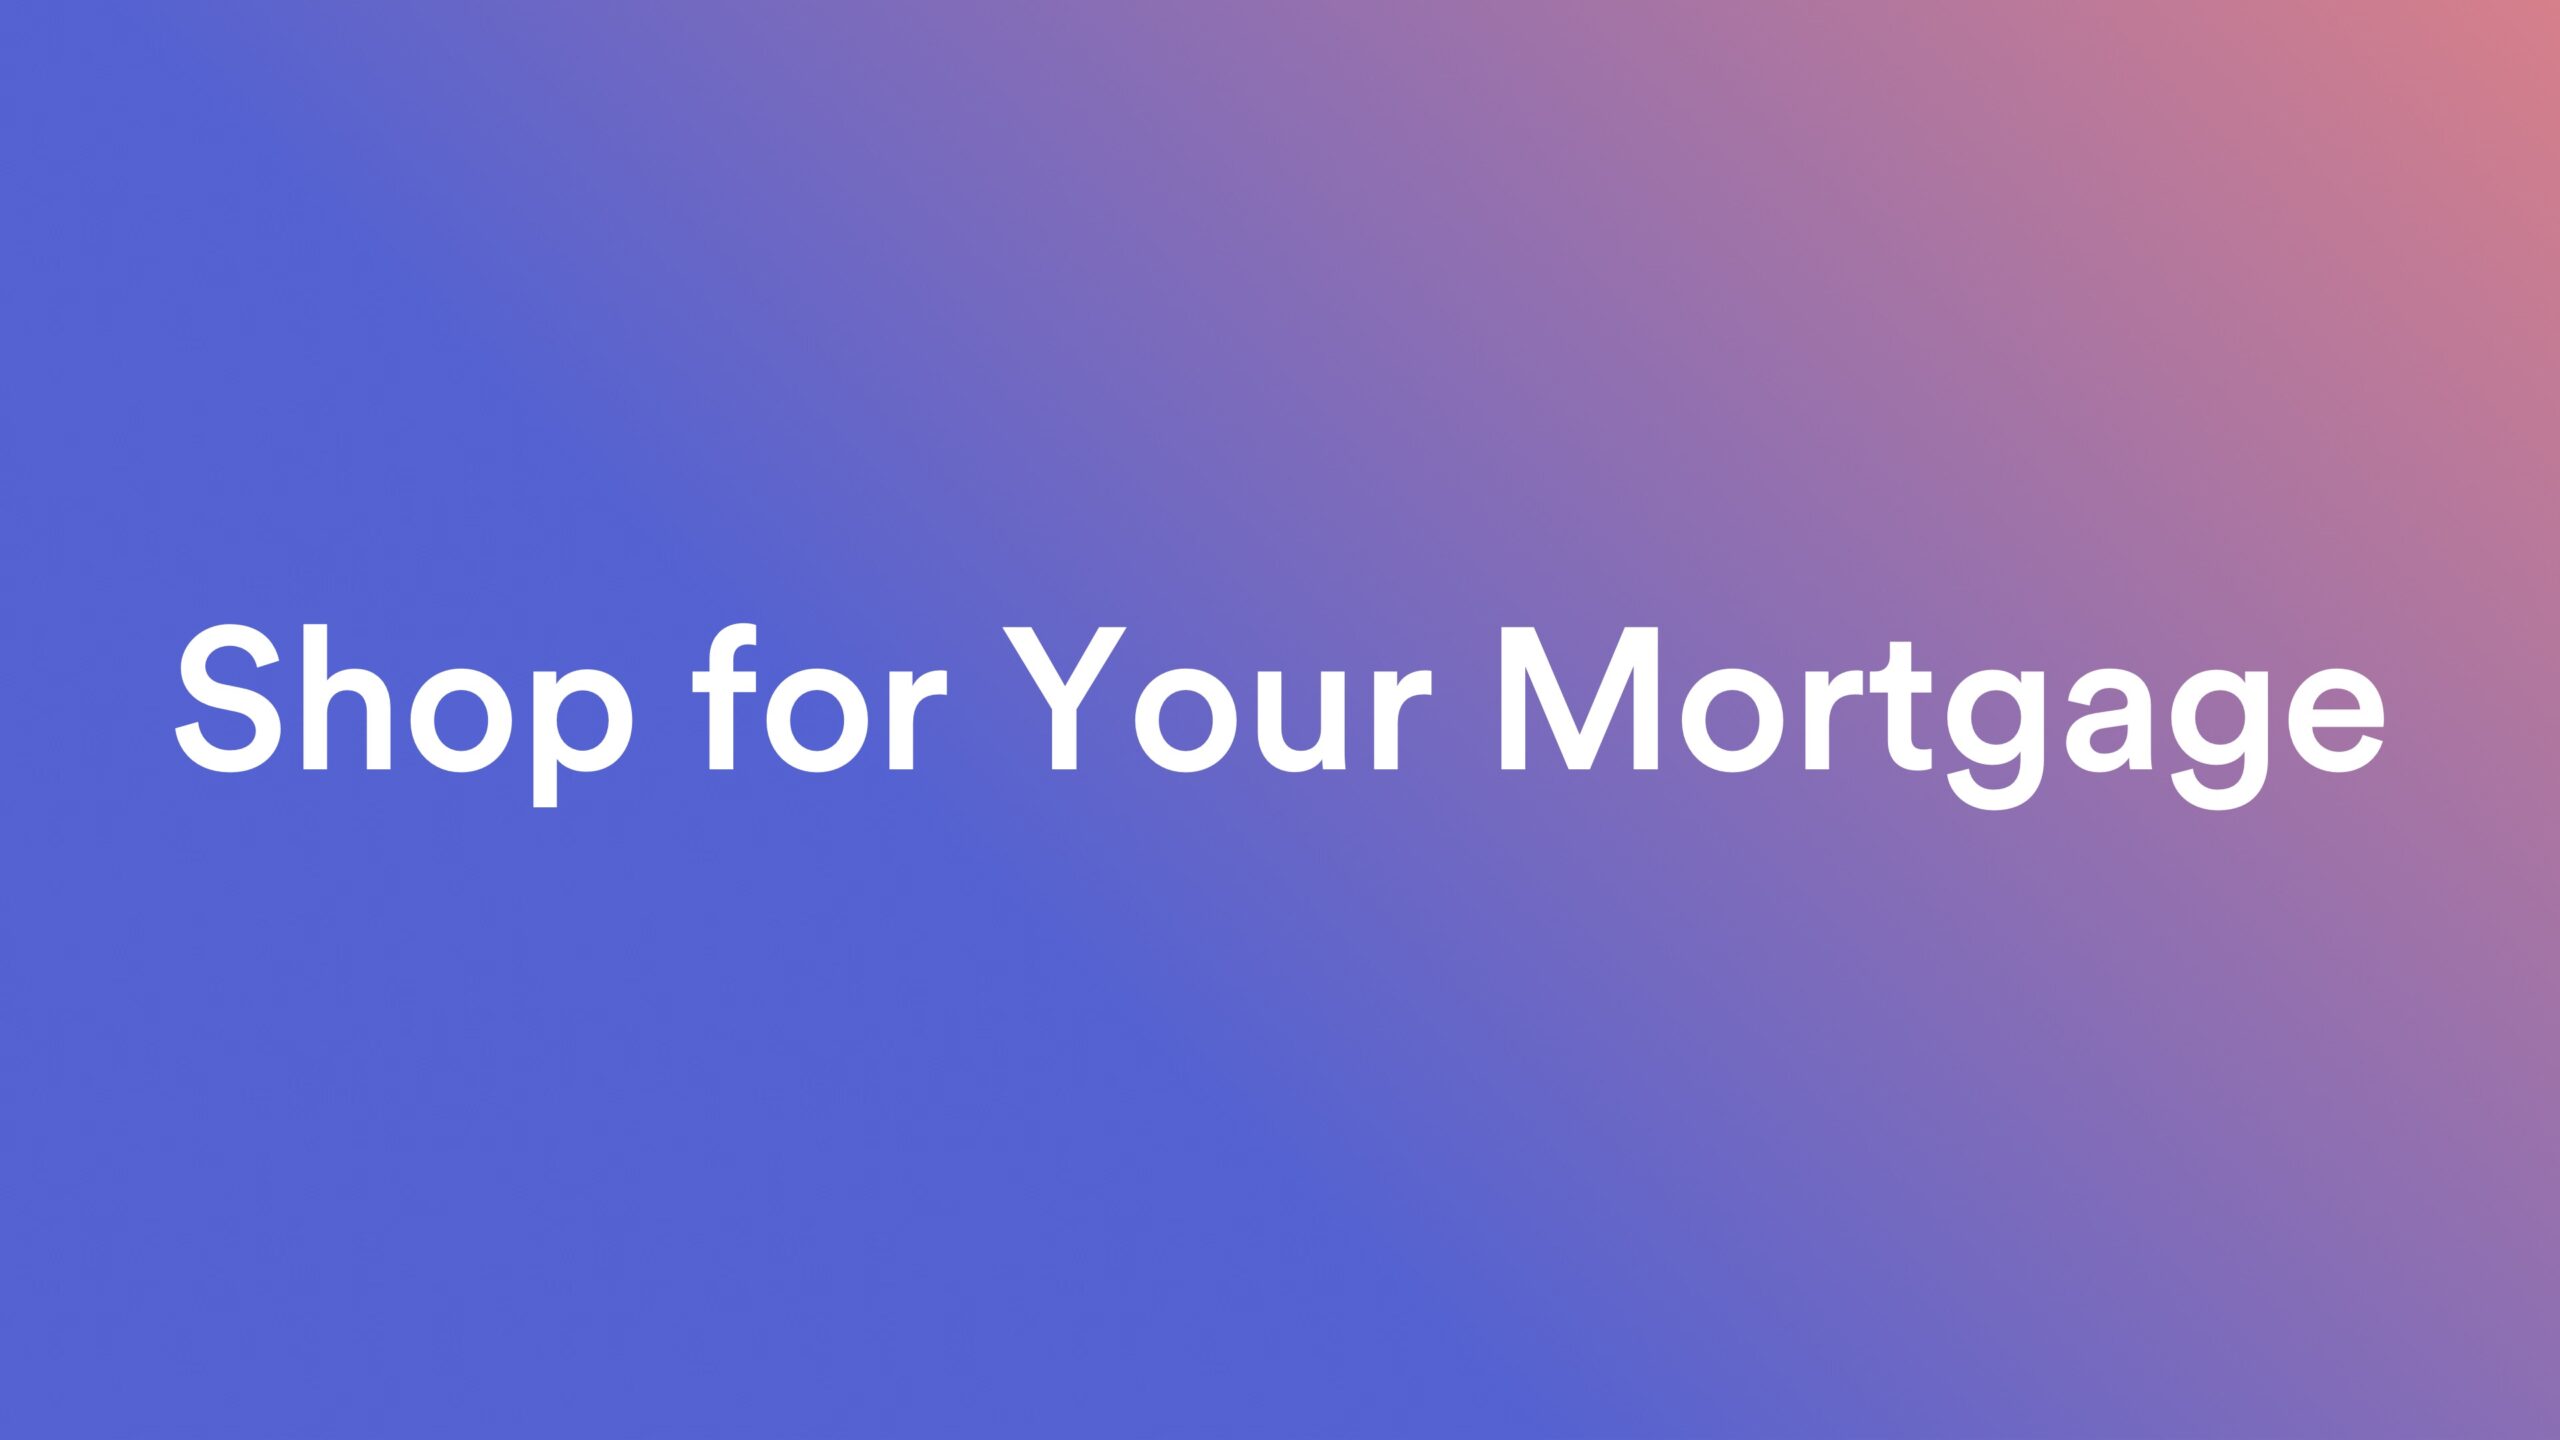 Graphic: Shop for your mortgage